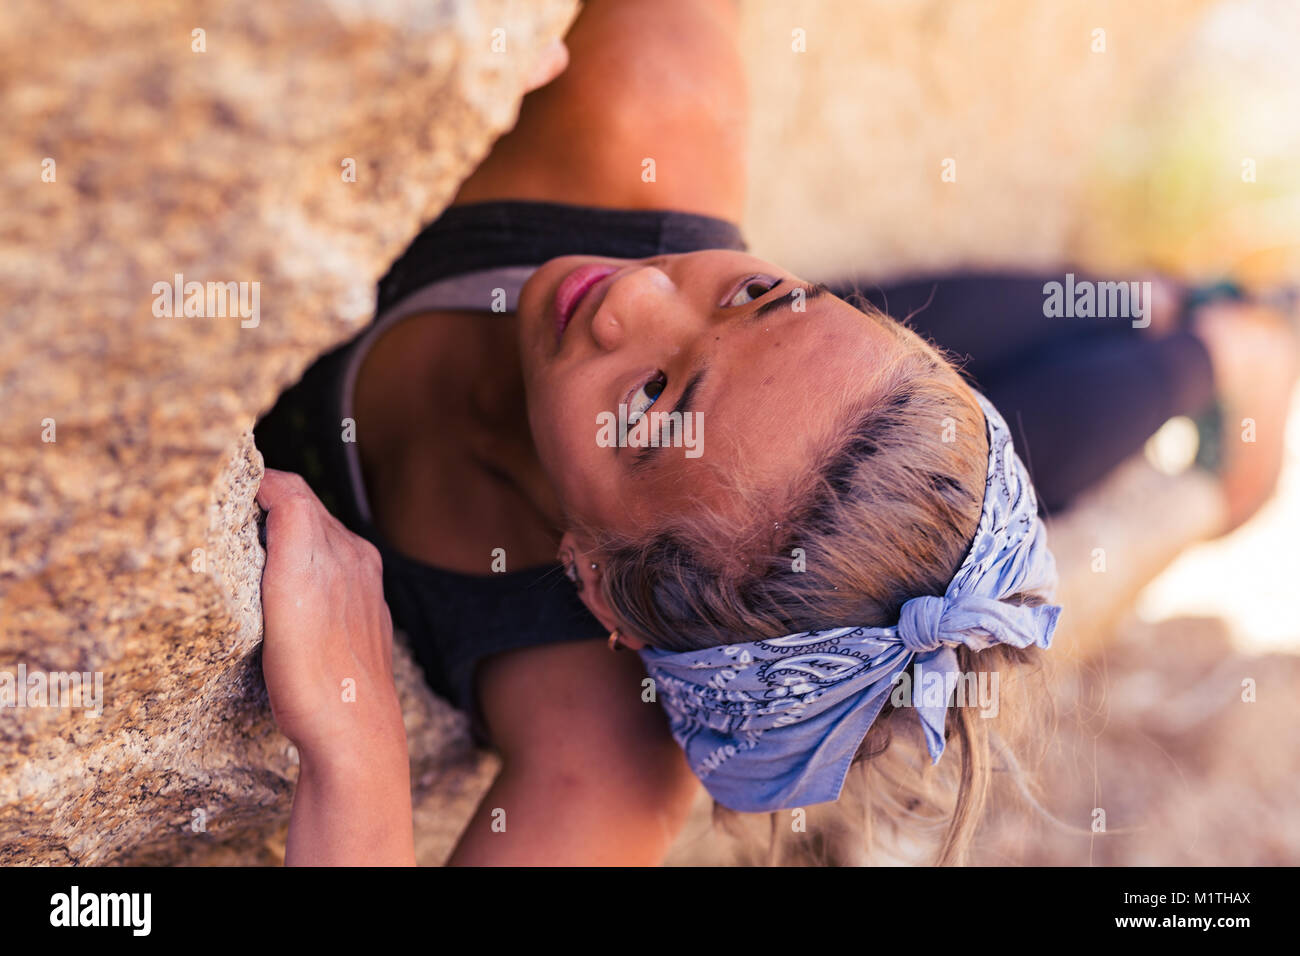 Closeup of petite asian woman rock climbing outdoors concentrates on the challenge Stock Photo